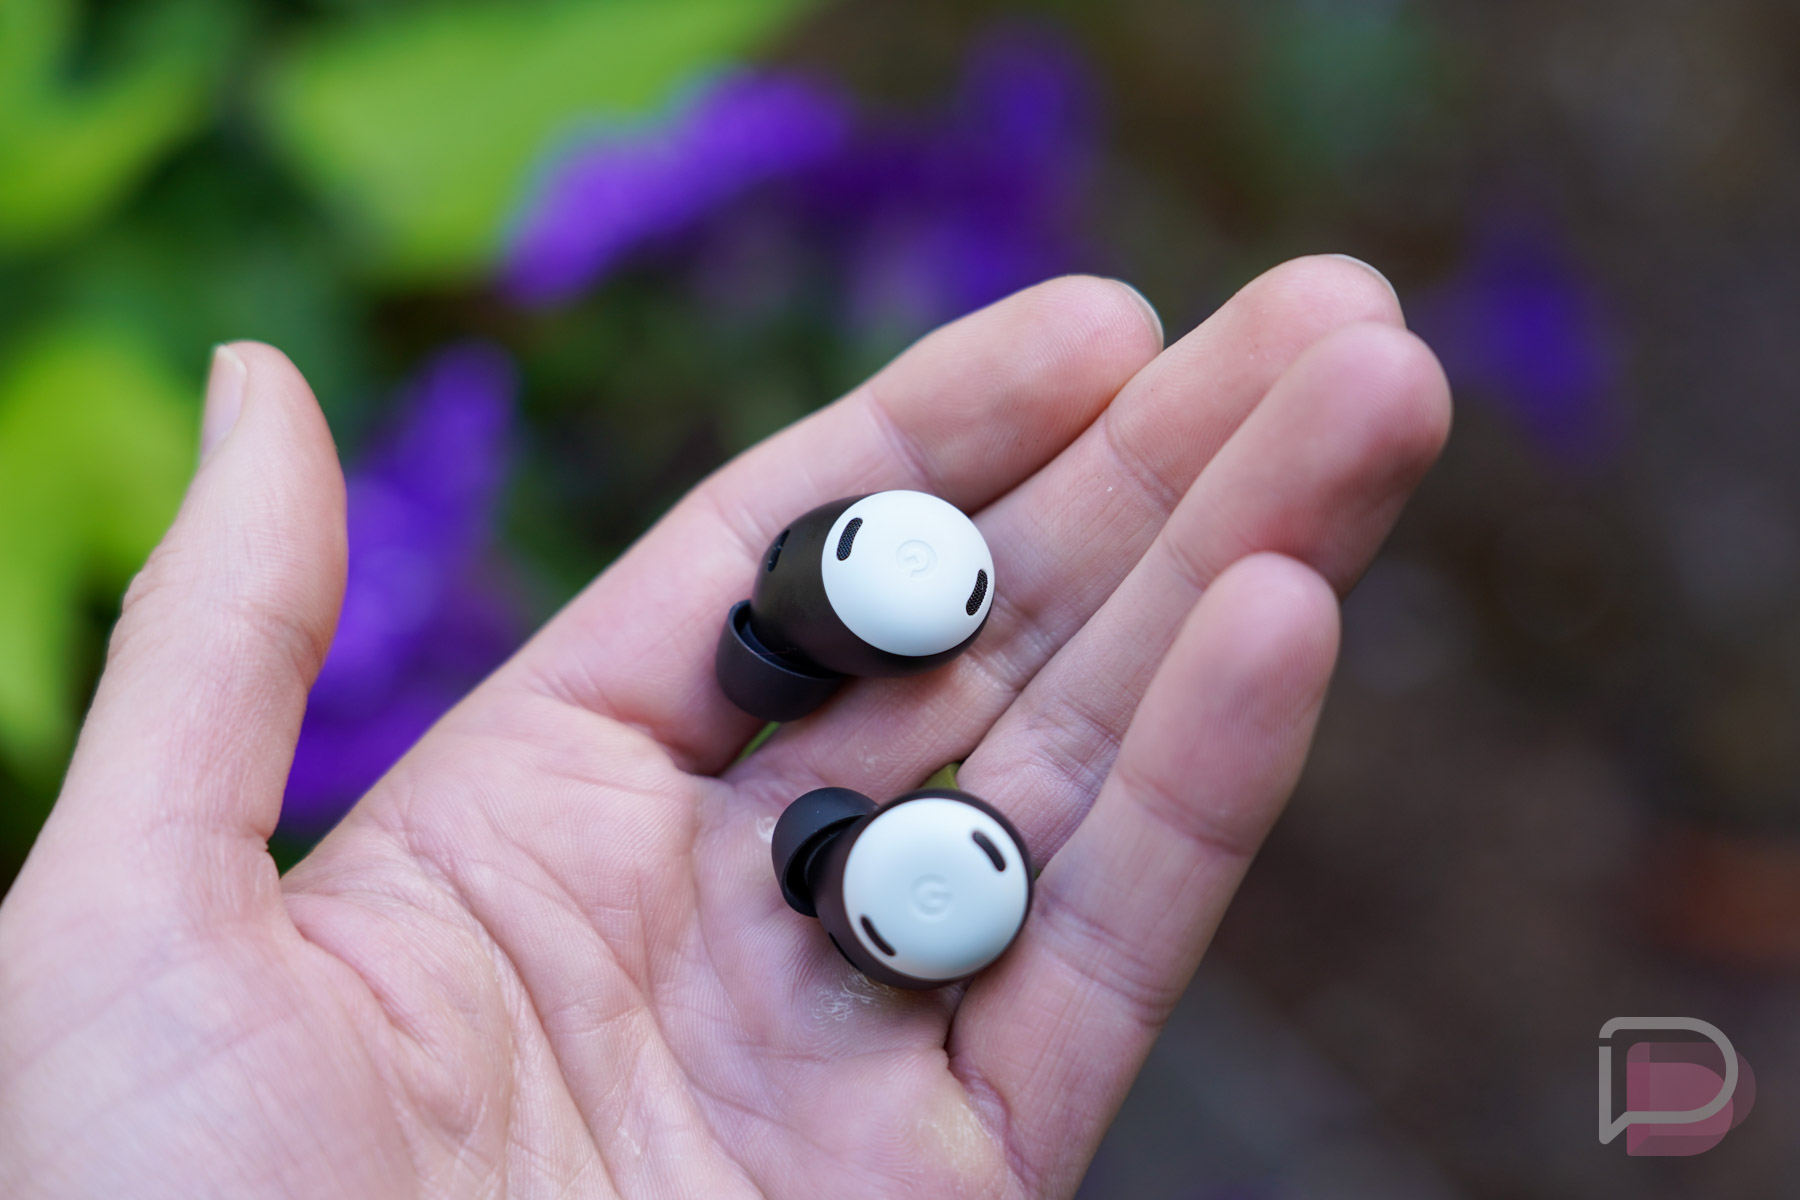 Google Pixel Buds Pro - Wireless Earbuds with Active Noise Cancellation -  Bluetooth Earbuds - Coral